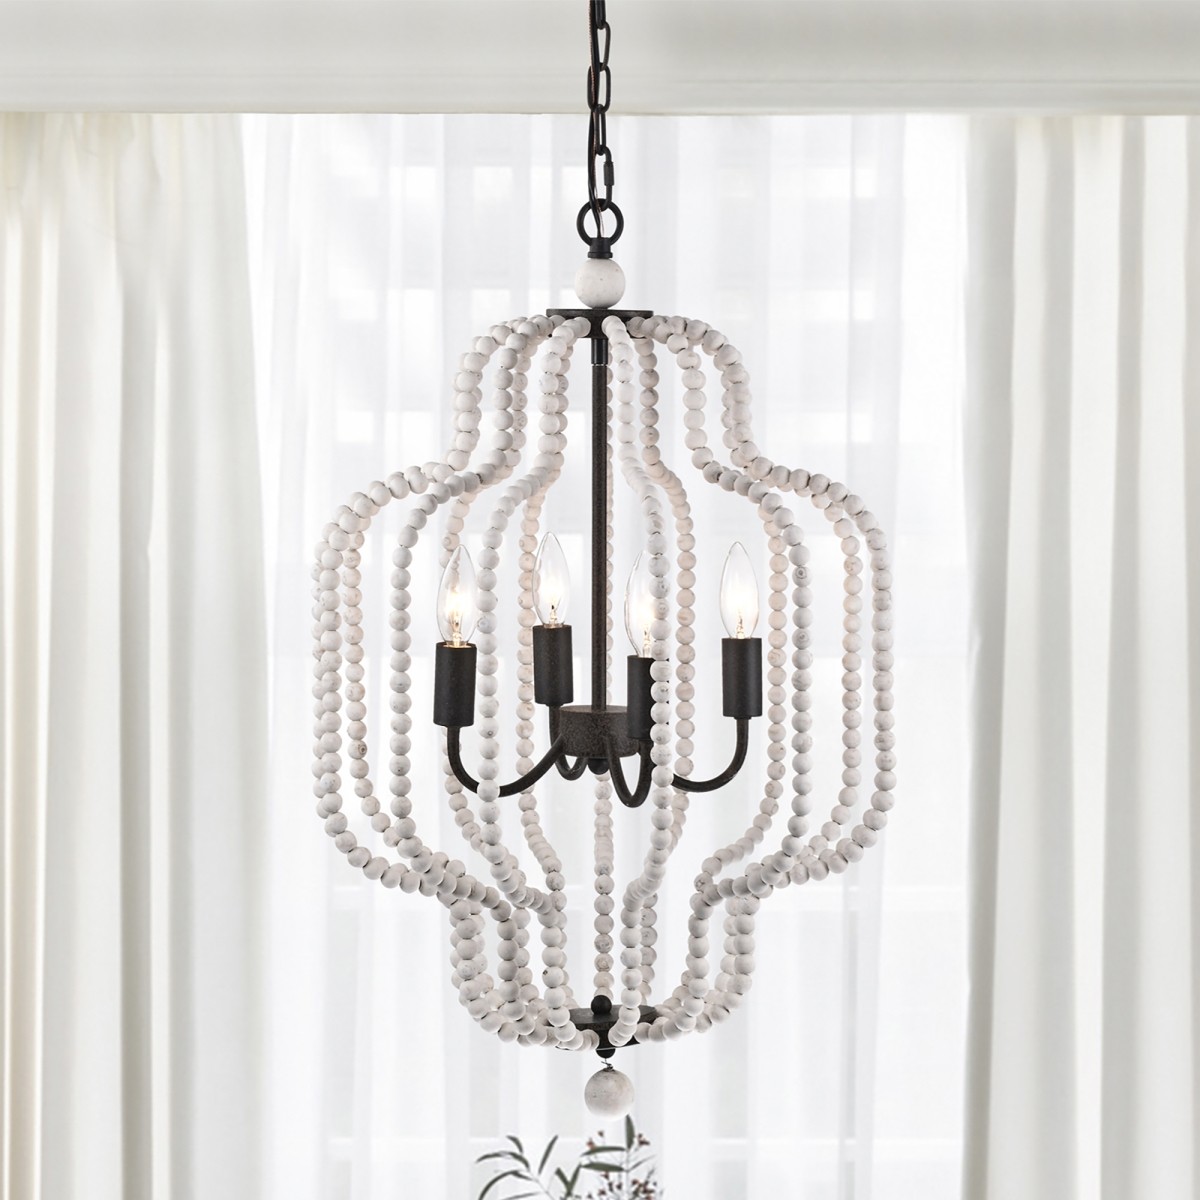 Sauxi 18 in. 4-Light Indoor Weathered White and Rustic Black Finish Chandelier with Light Kit